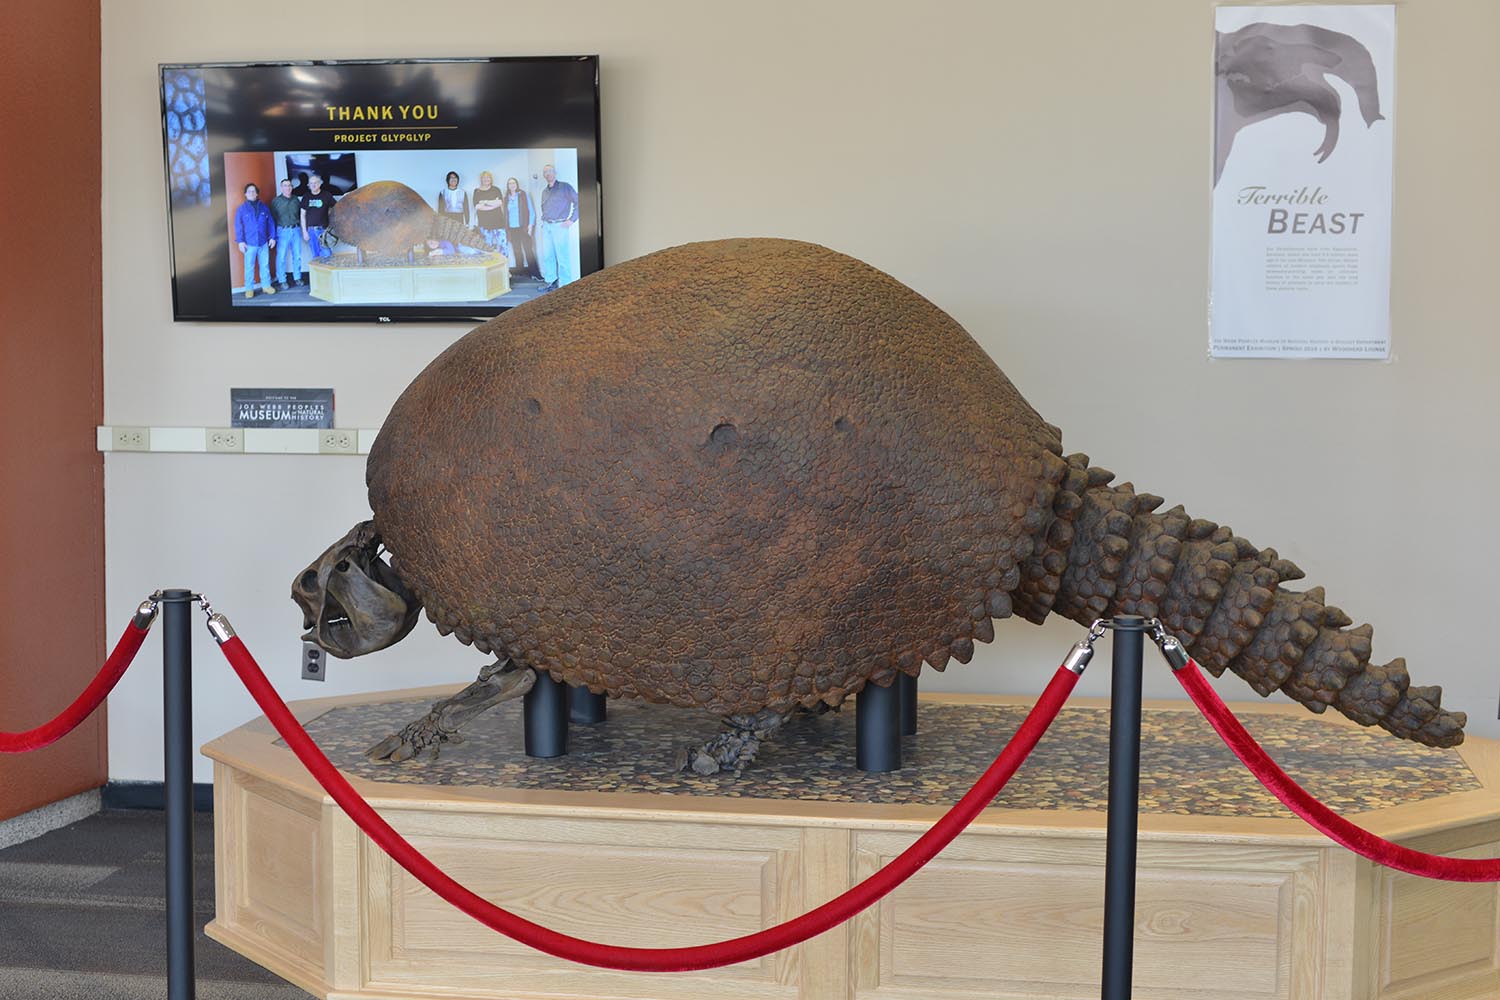 The Deinotherium joins Shelley the Glyptodon inside Exley Science Center. This 8-foot-long fossil cast of an armadillo-like animal also was found in the Exley penthouse and was installed in February 2018. Read more about Shelley in this past Wesleyan Connection article. (Photos by Olivia Drake)